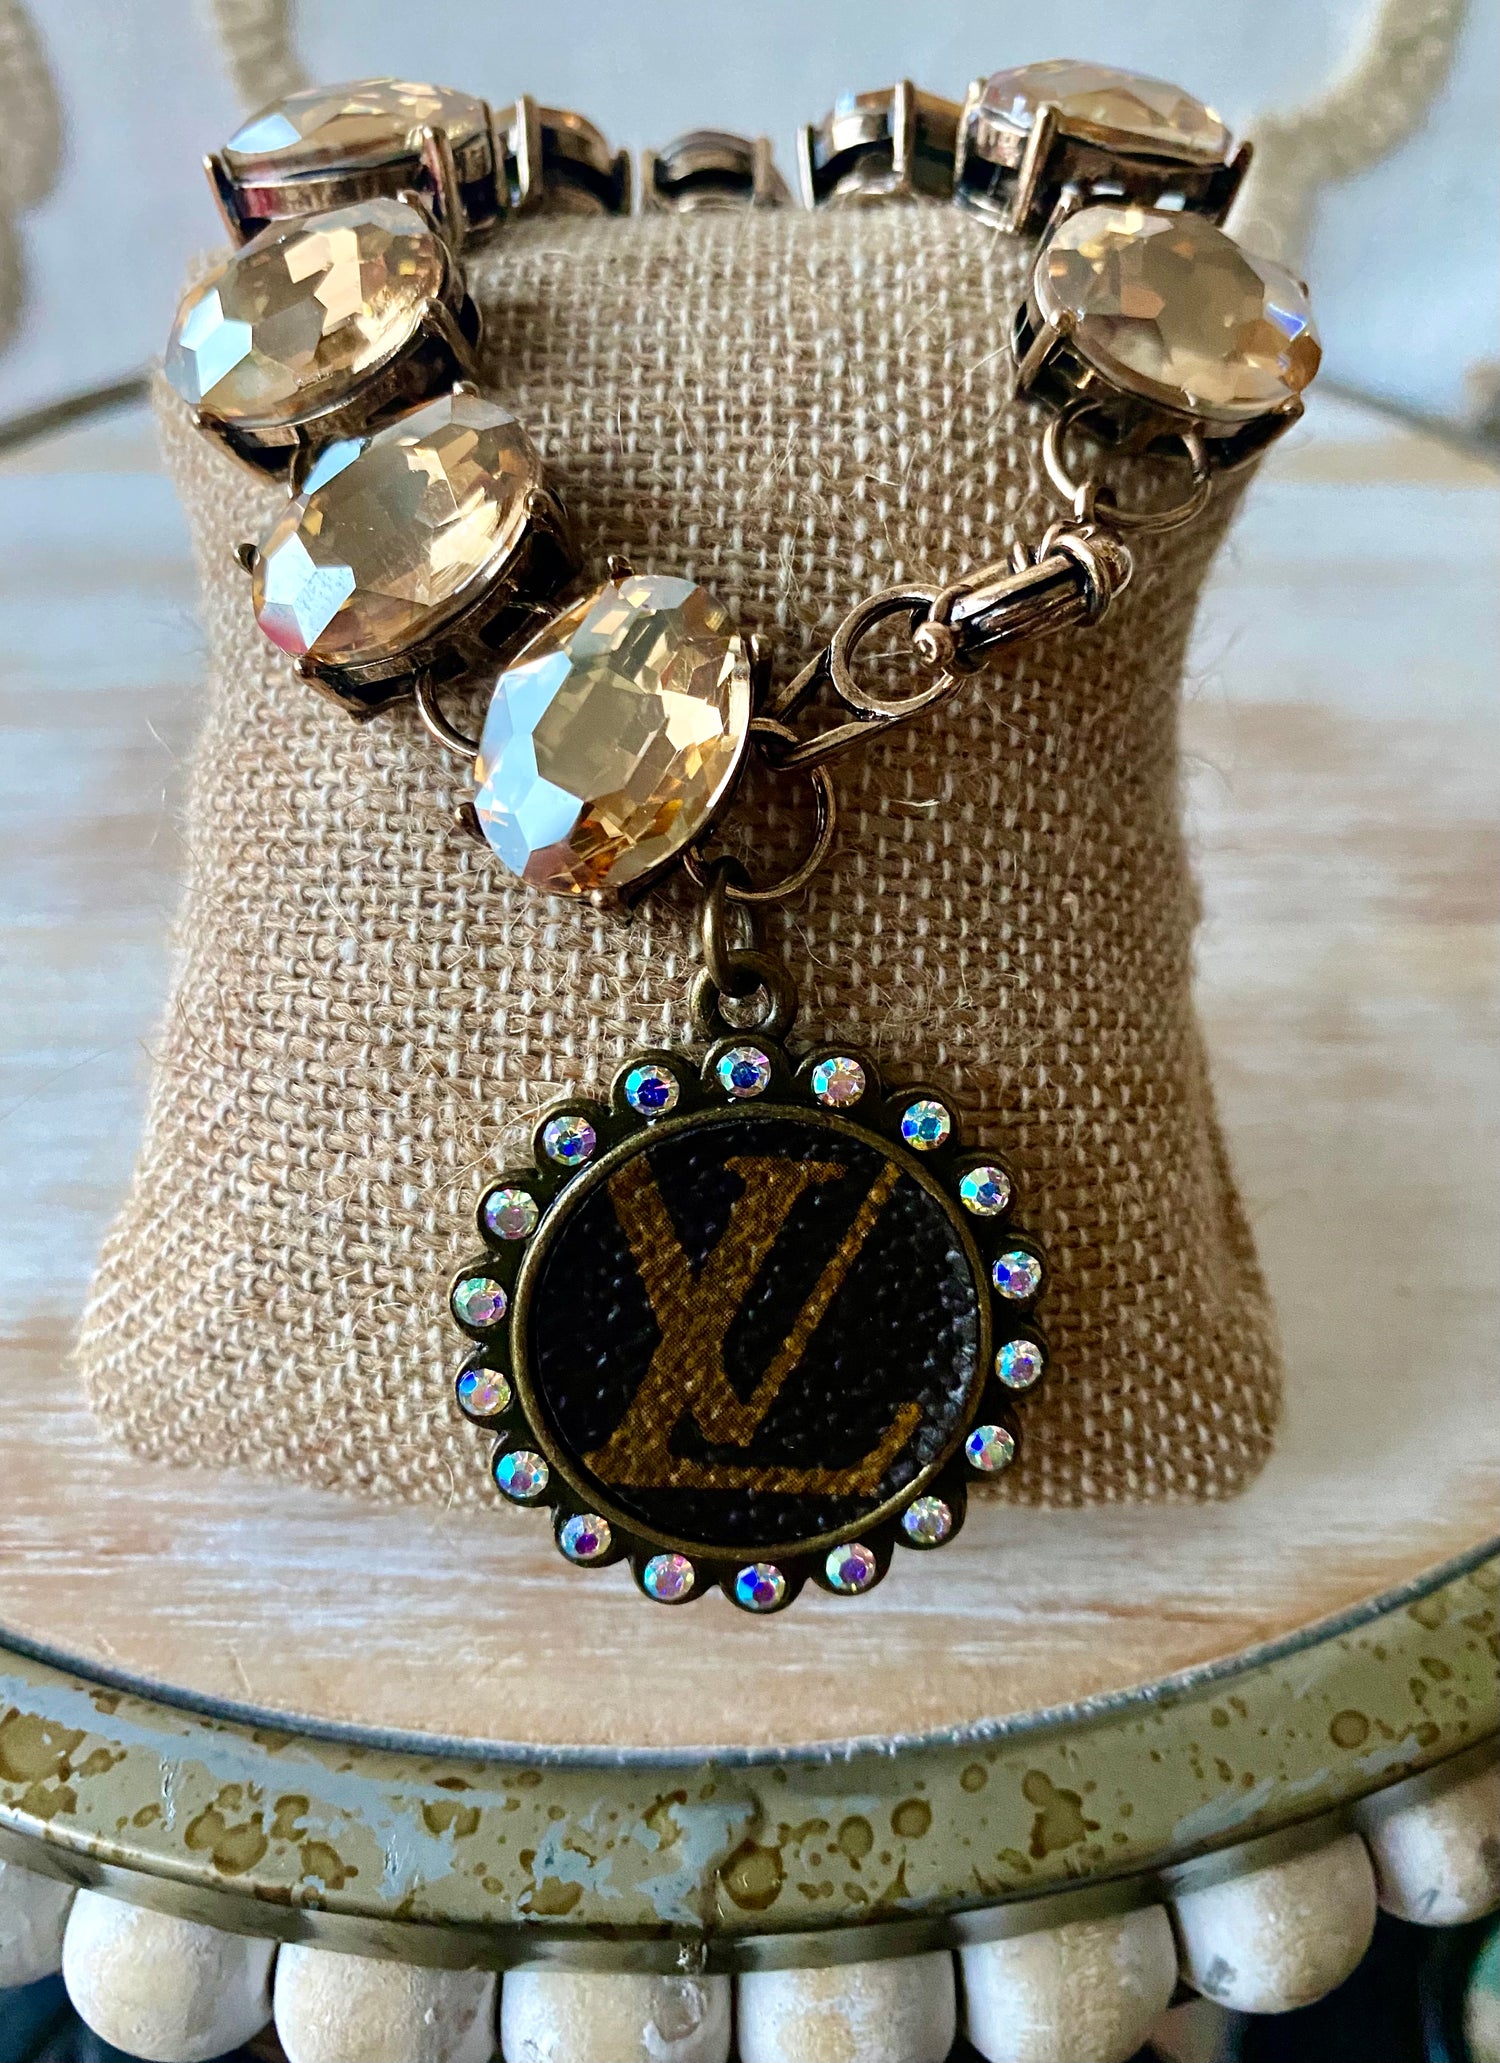 Upcycled LV Necklace